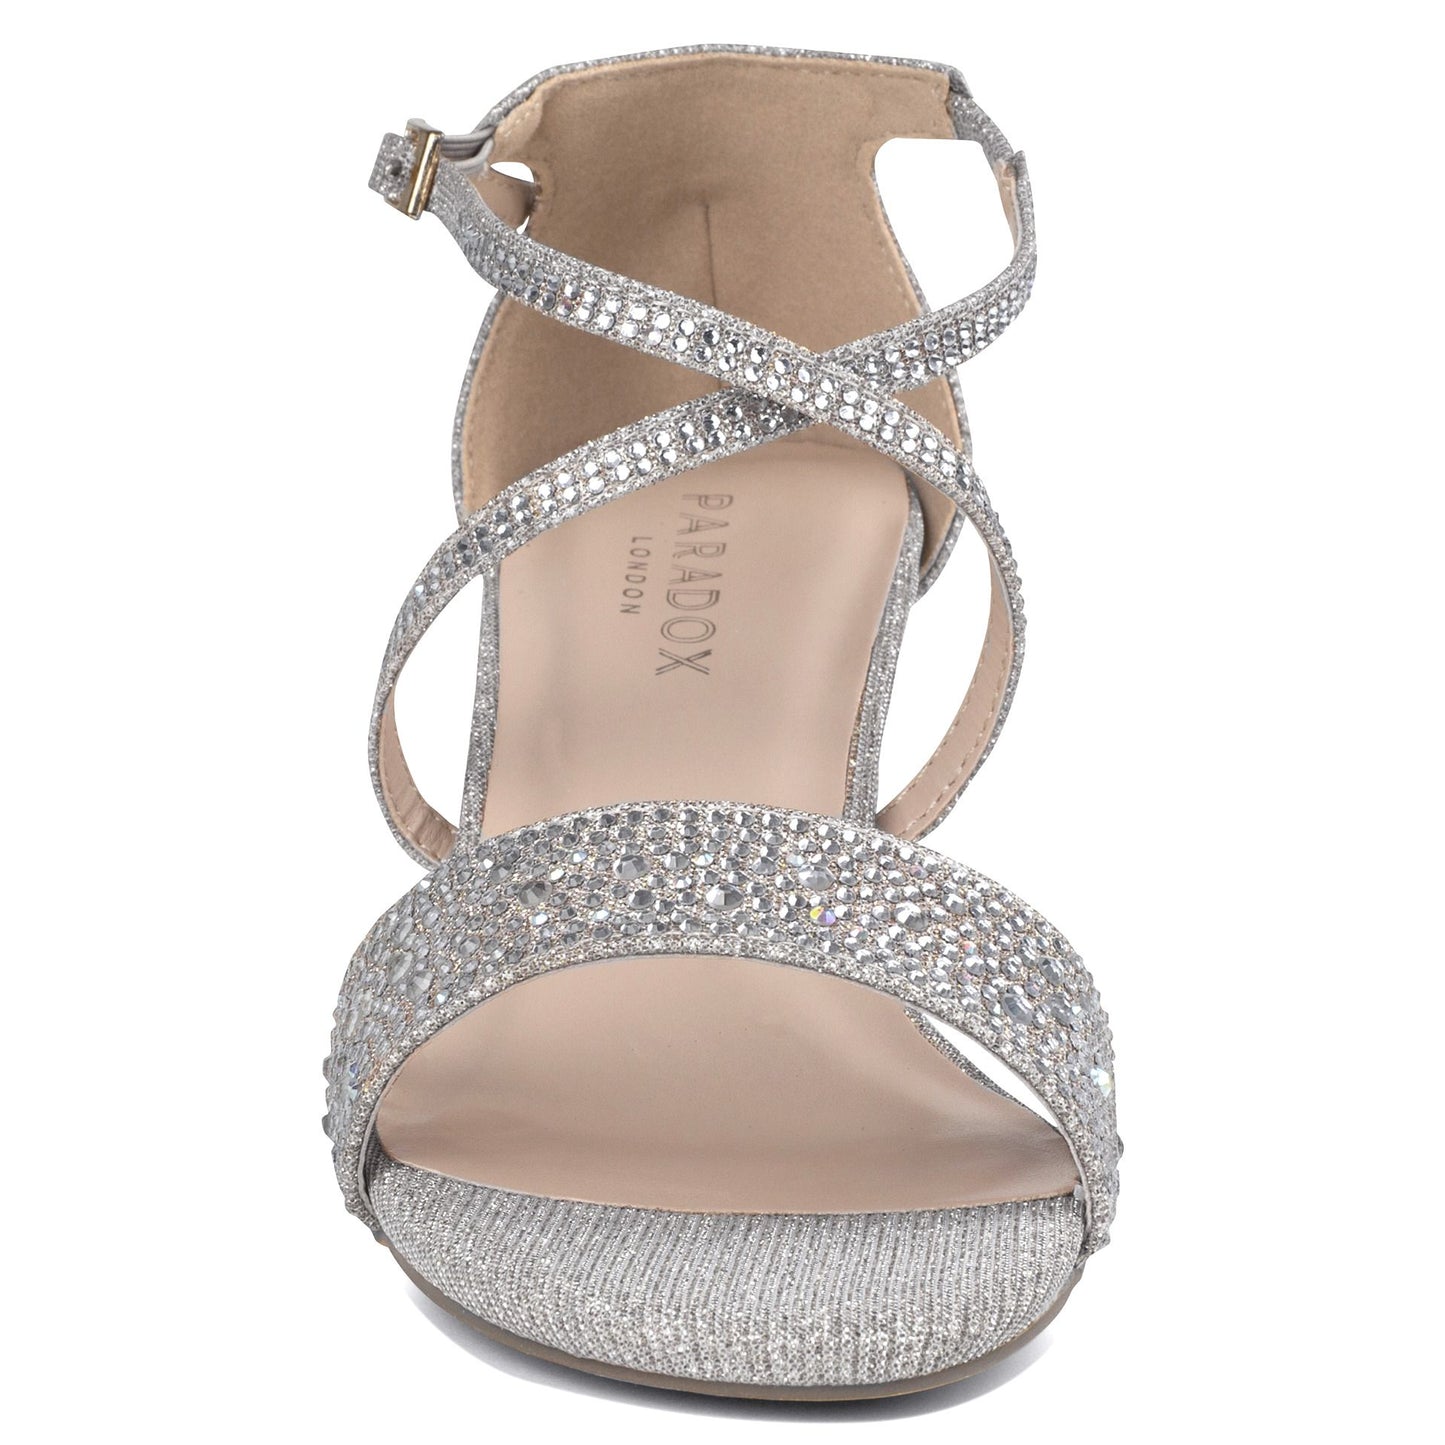 Front view of Metallic silver shoe with 2" block heel and criss cross straps